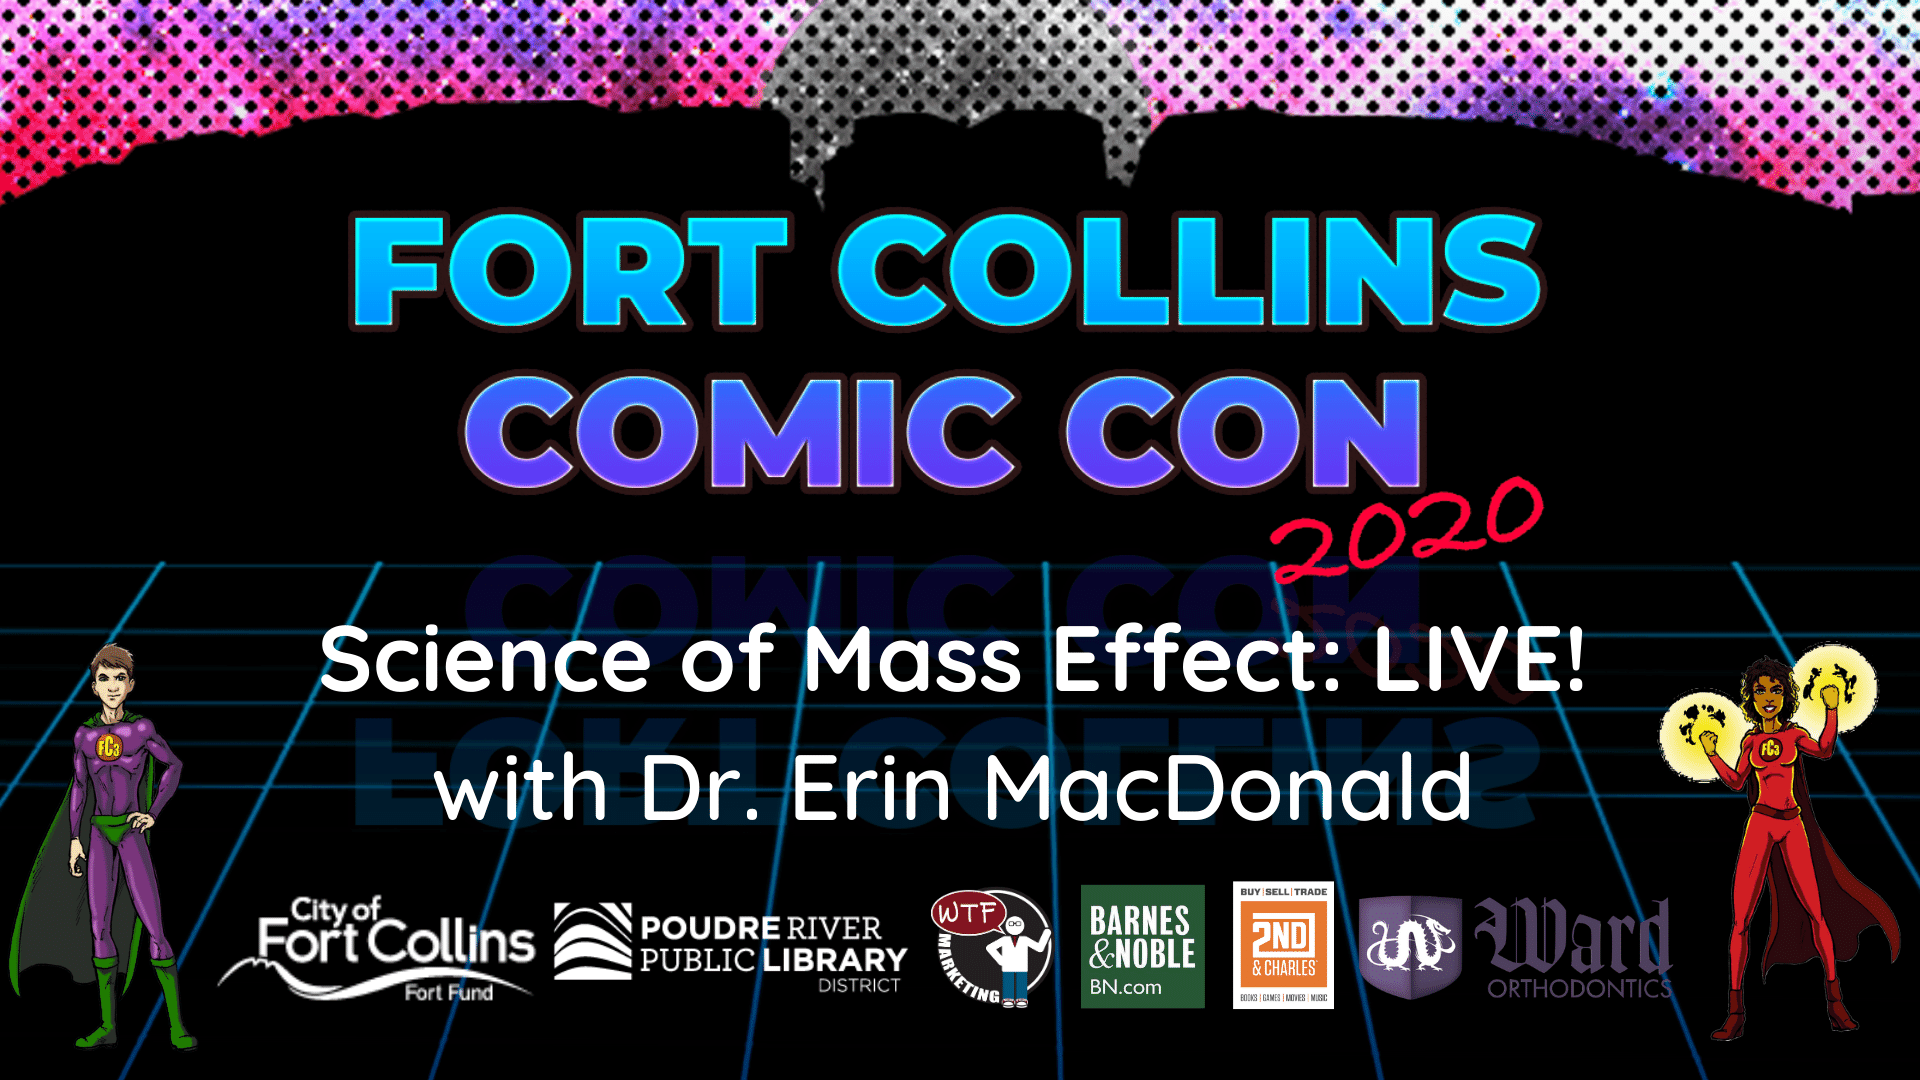 The Science of Mass Effect: Live!